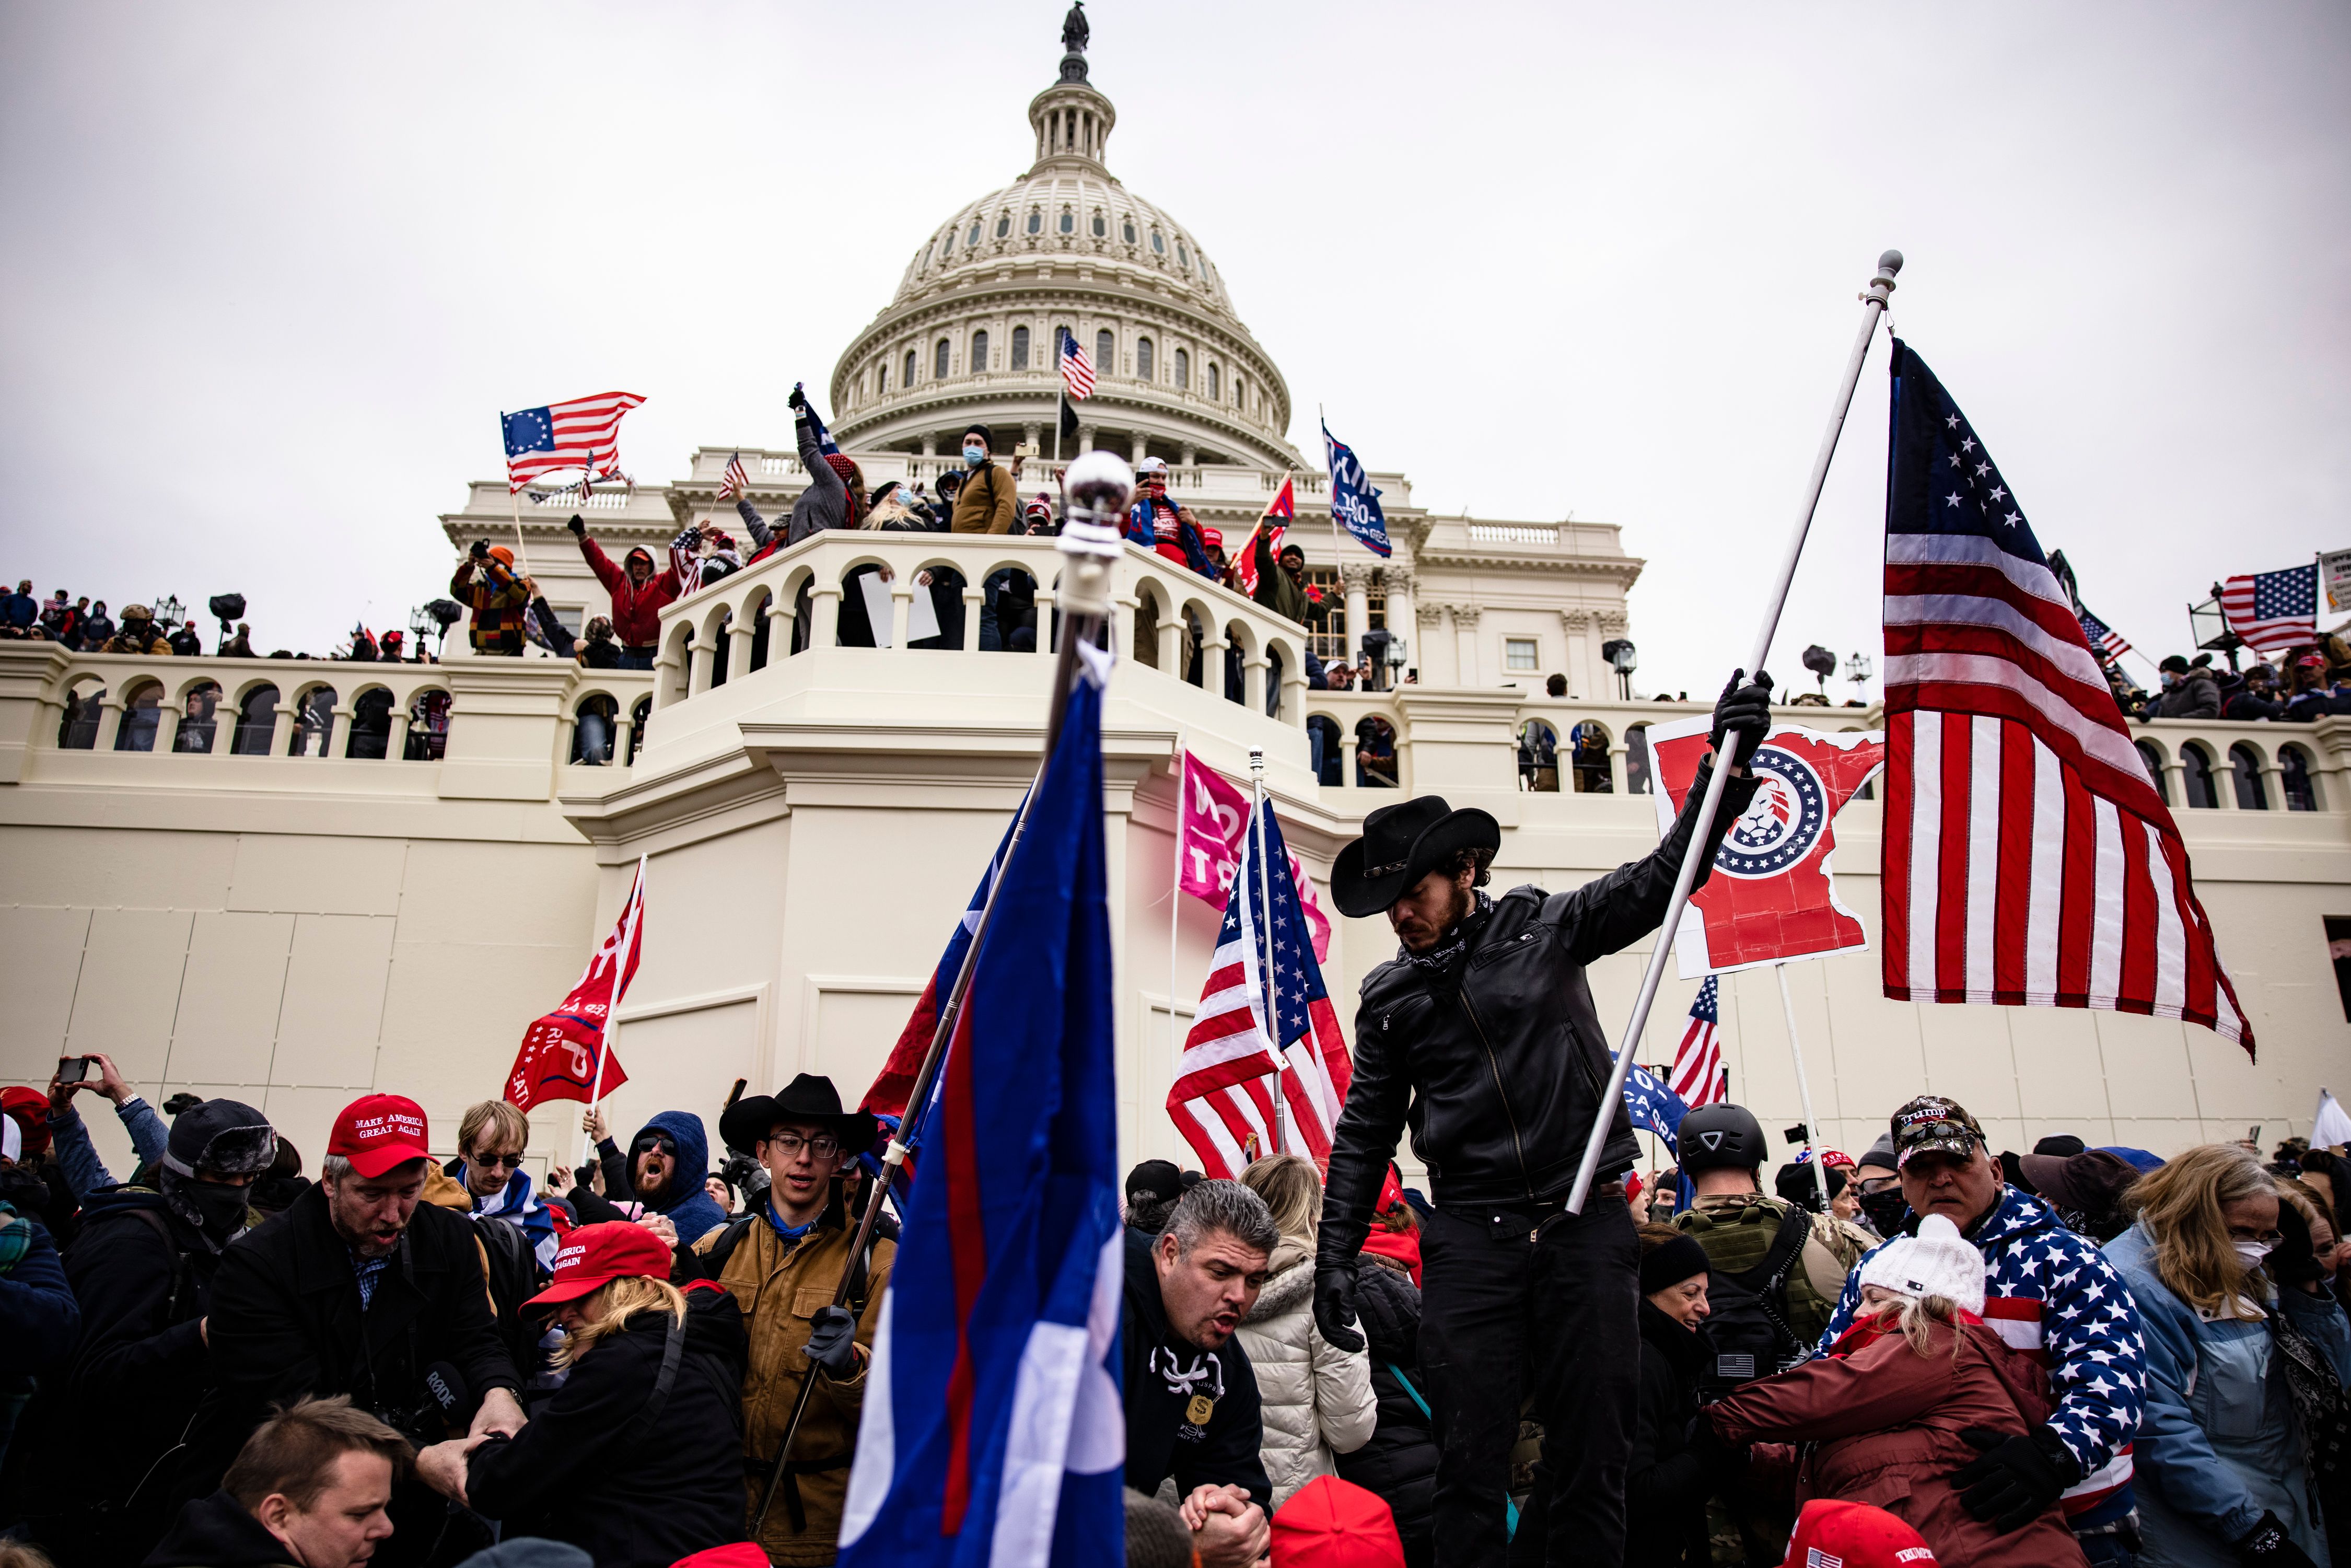 People attack the U.S. Capitol.